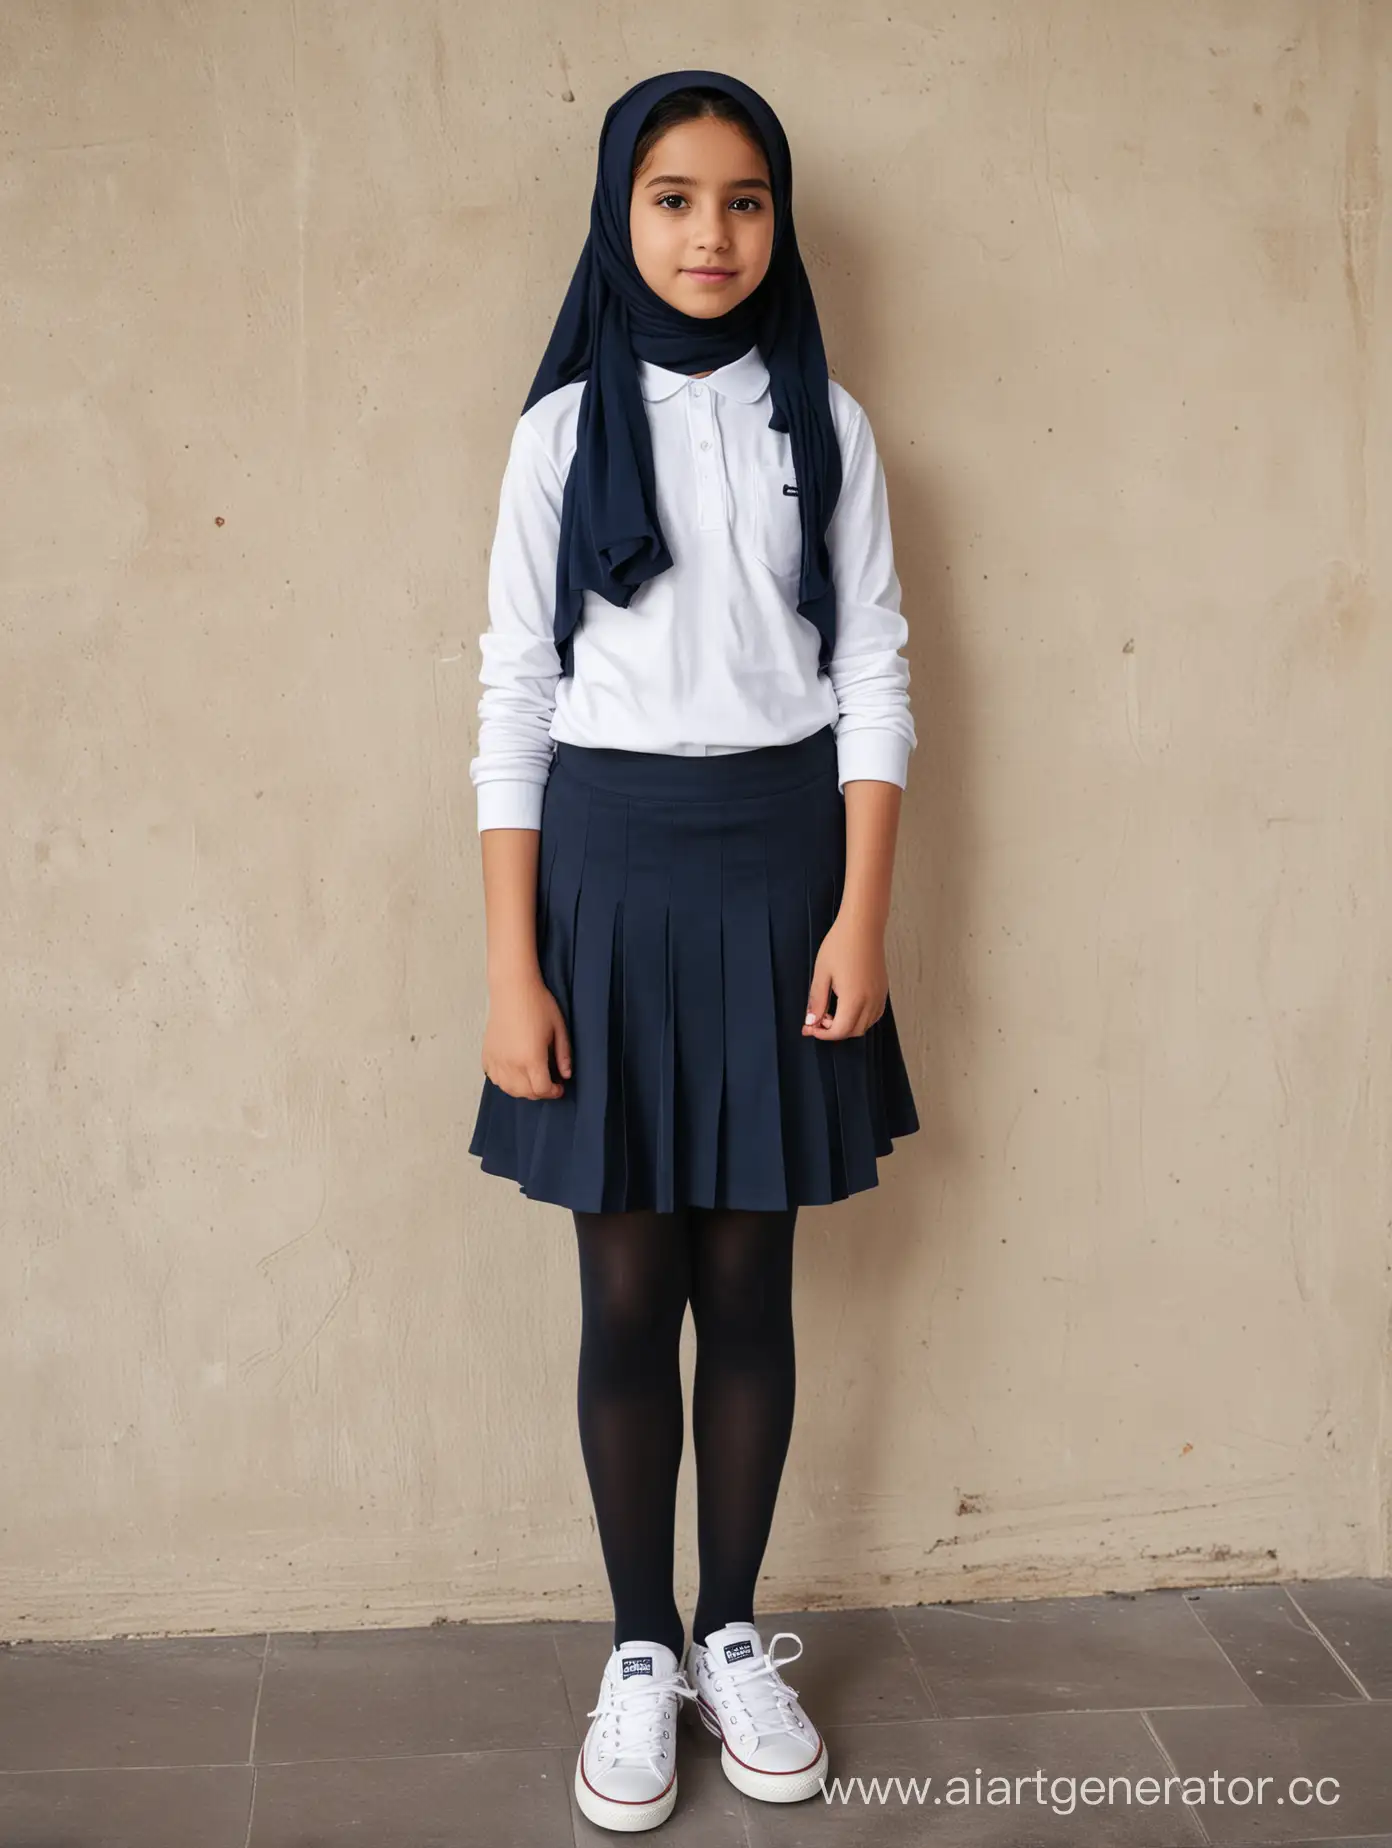 Tween-Girl-in-Hijab-Fashion-Poses-Near-Wall-with-Hands-Raised